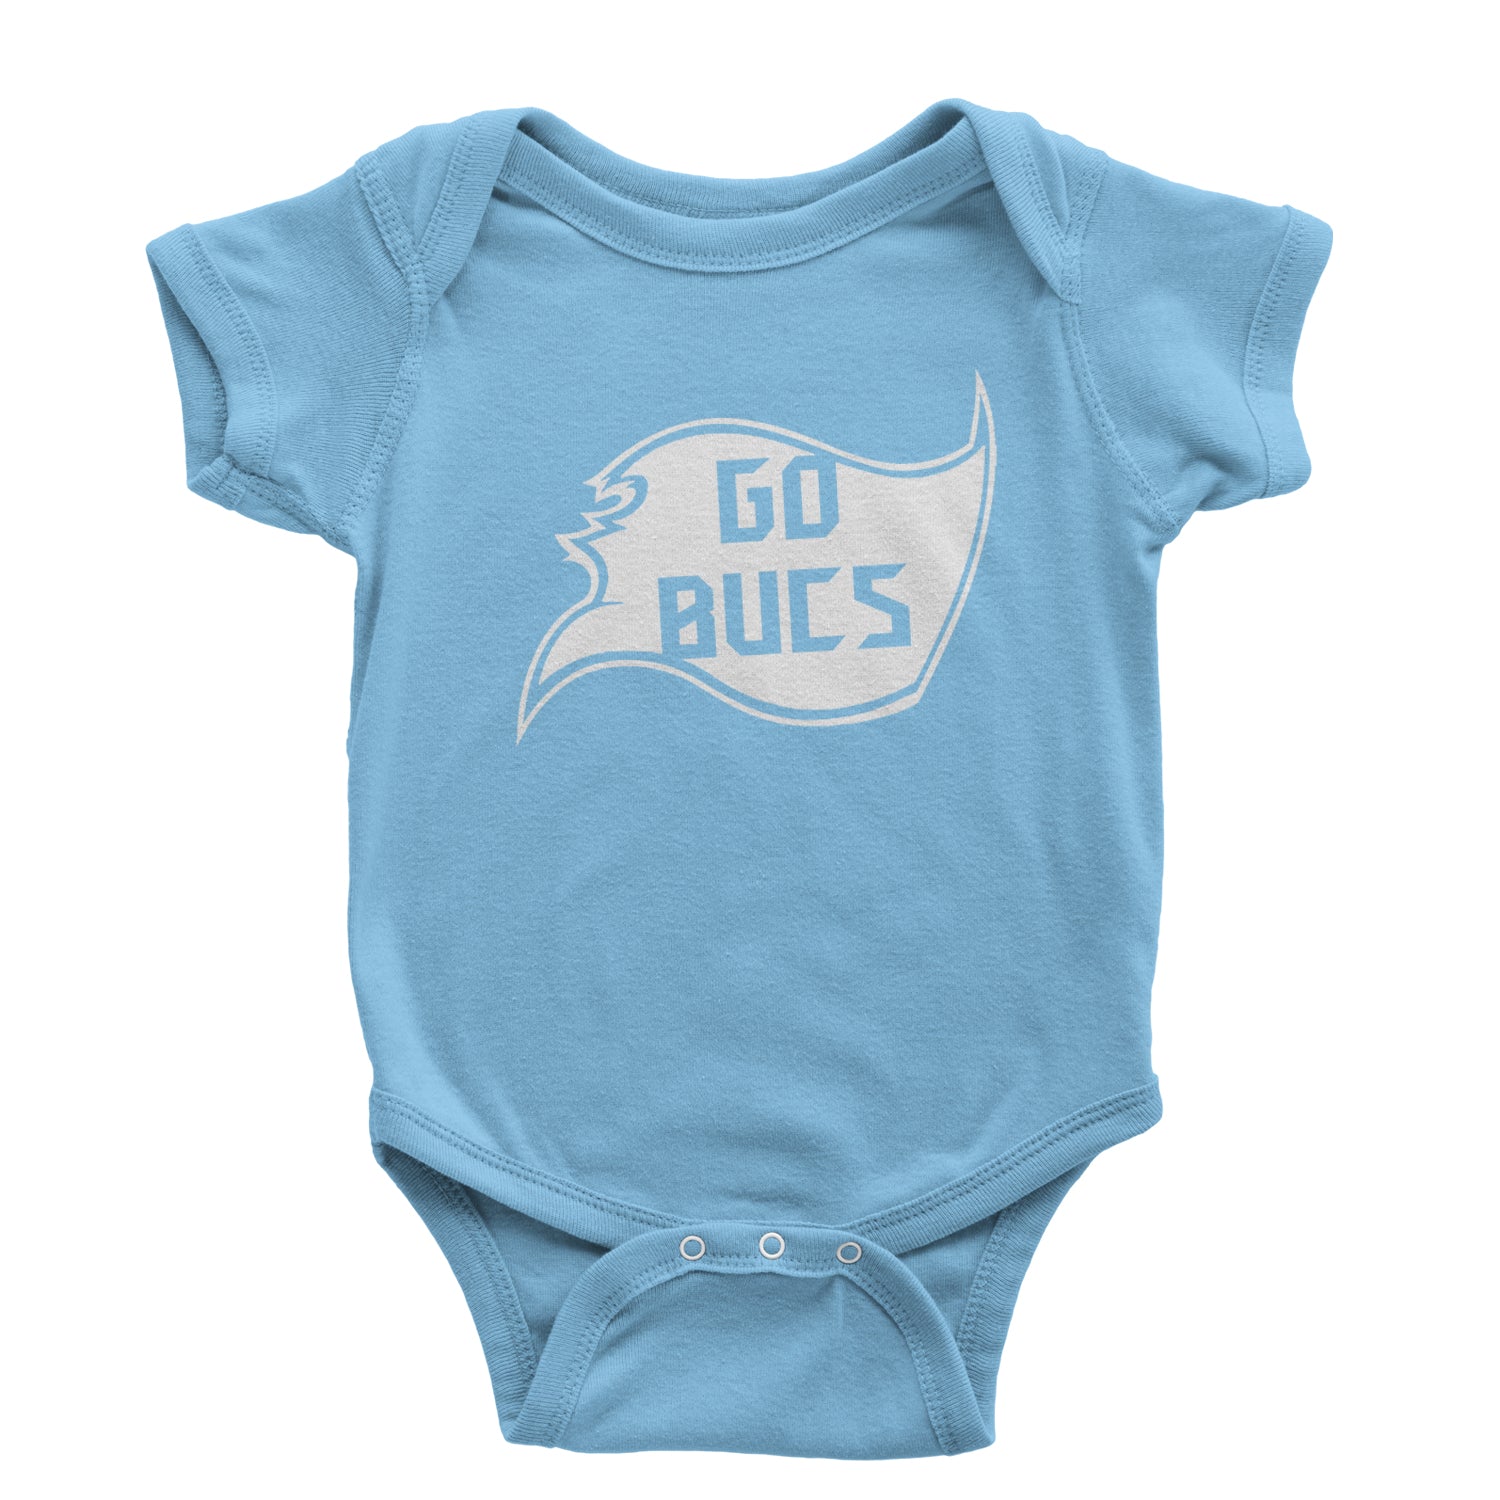 Go Bucs Buccaneers Infant One-Piece Romper Bodysuit and Toddler T-shirt ball, flag, foot, raise, tampa, the by Expression Tees